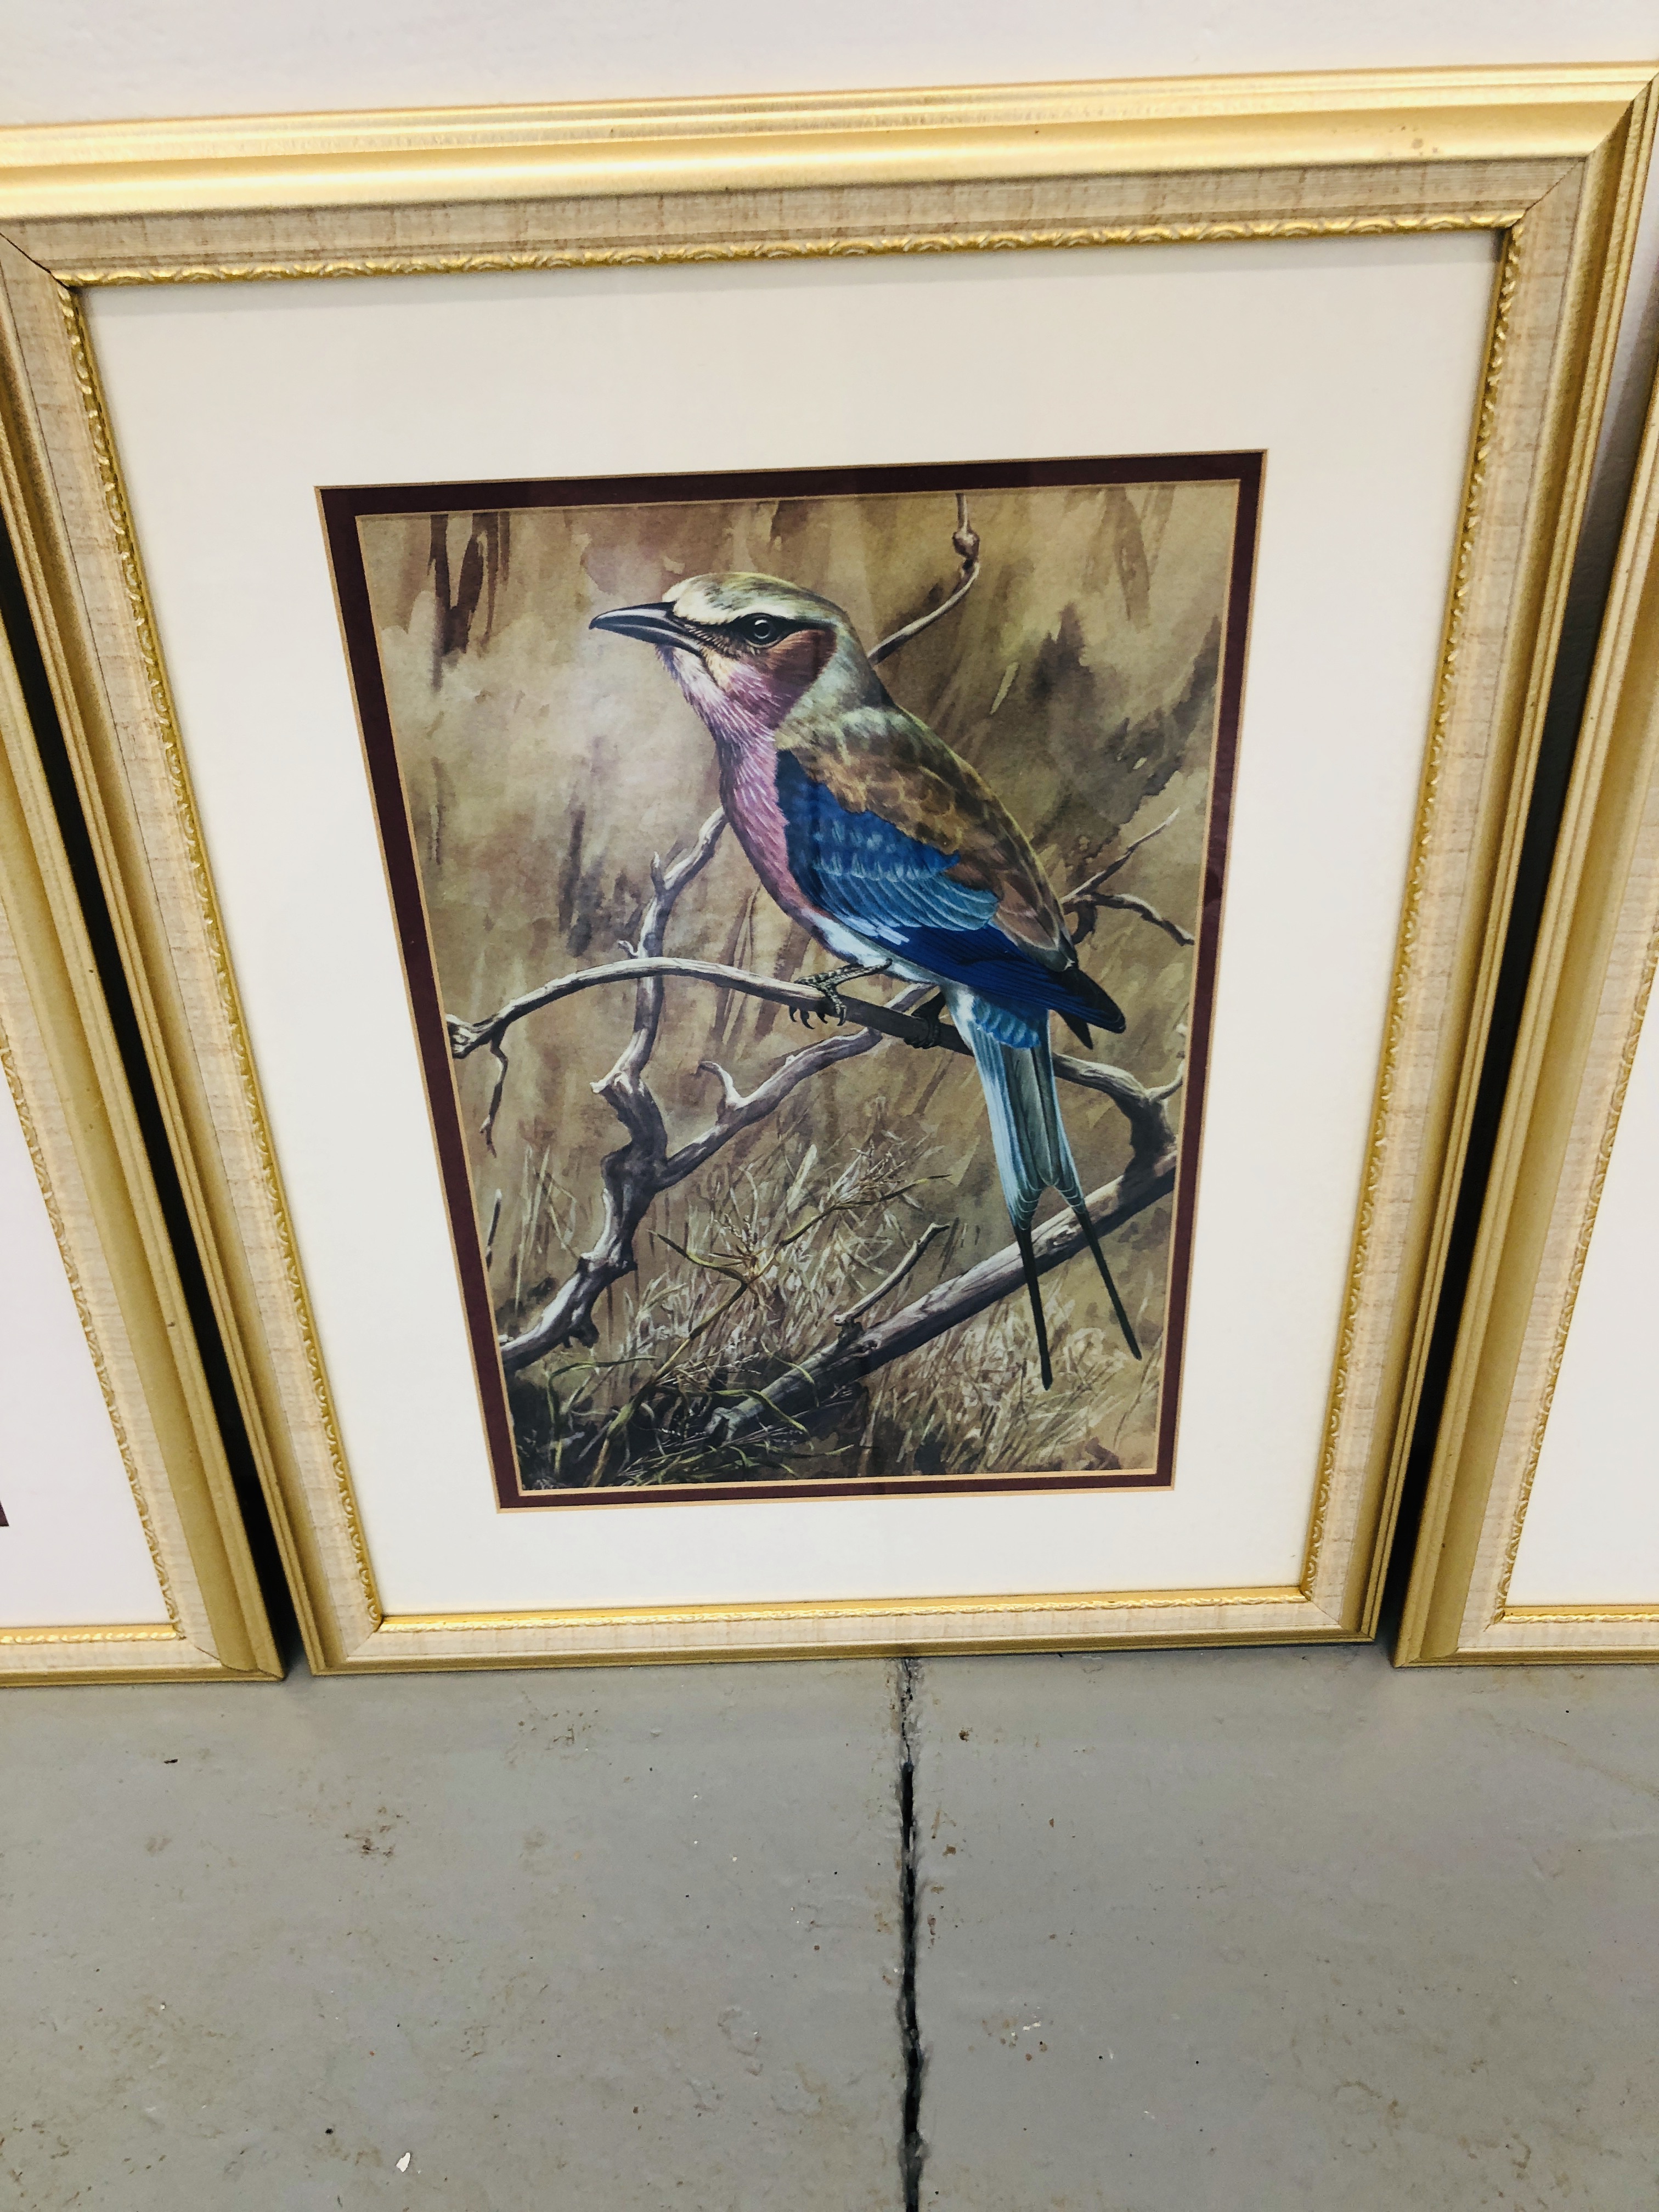 SET OF FRAMED BIRD PRINTS BY "KELLY" - Image 3 of 5